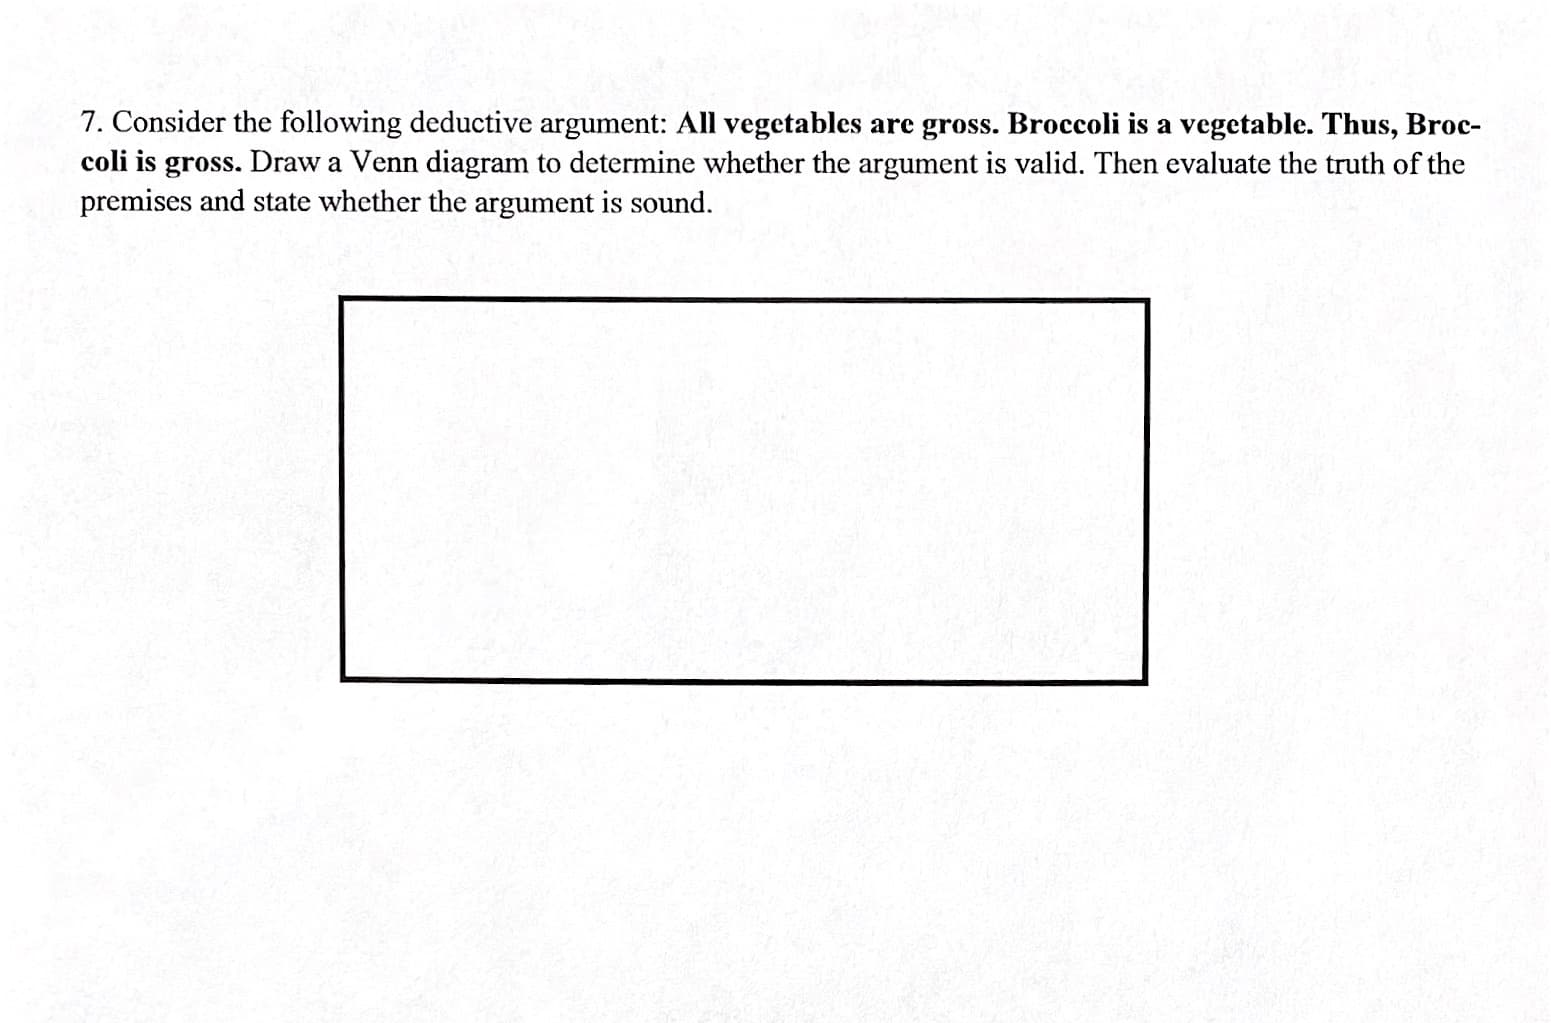 7. Consider the following deductive argument: All vegetables are gross. Broccoli is a vegetable. Thus, Broc-
coli is gross. Draw a Venn diagram to determine whether the argument is valid. Then evaluate the truth of the
premises and state whether the argument is sound.
